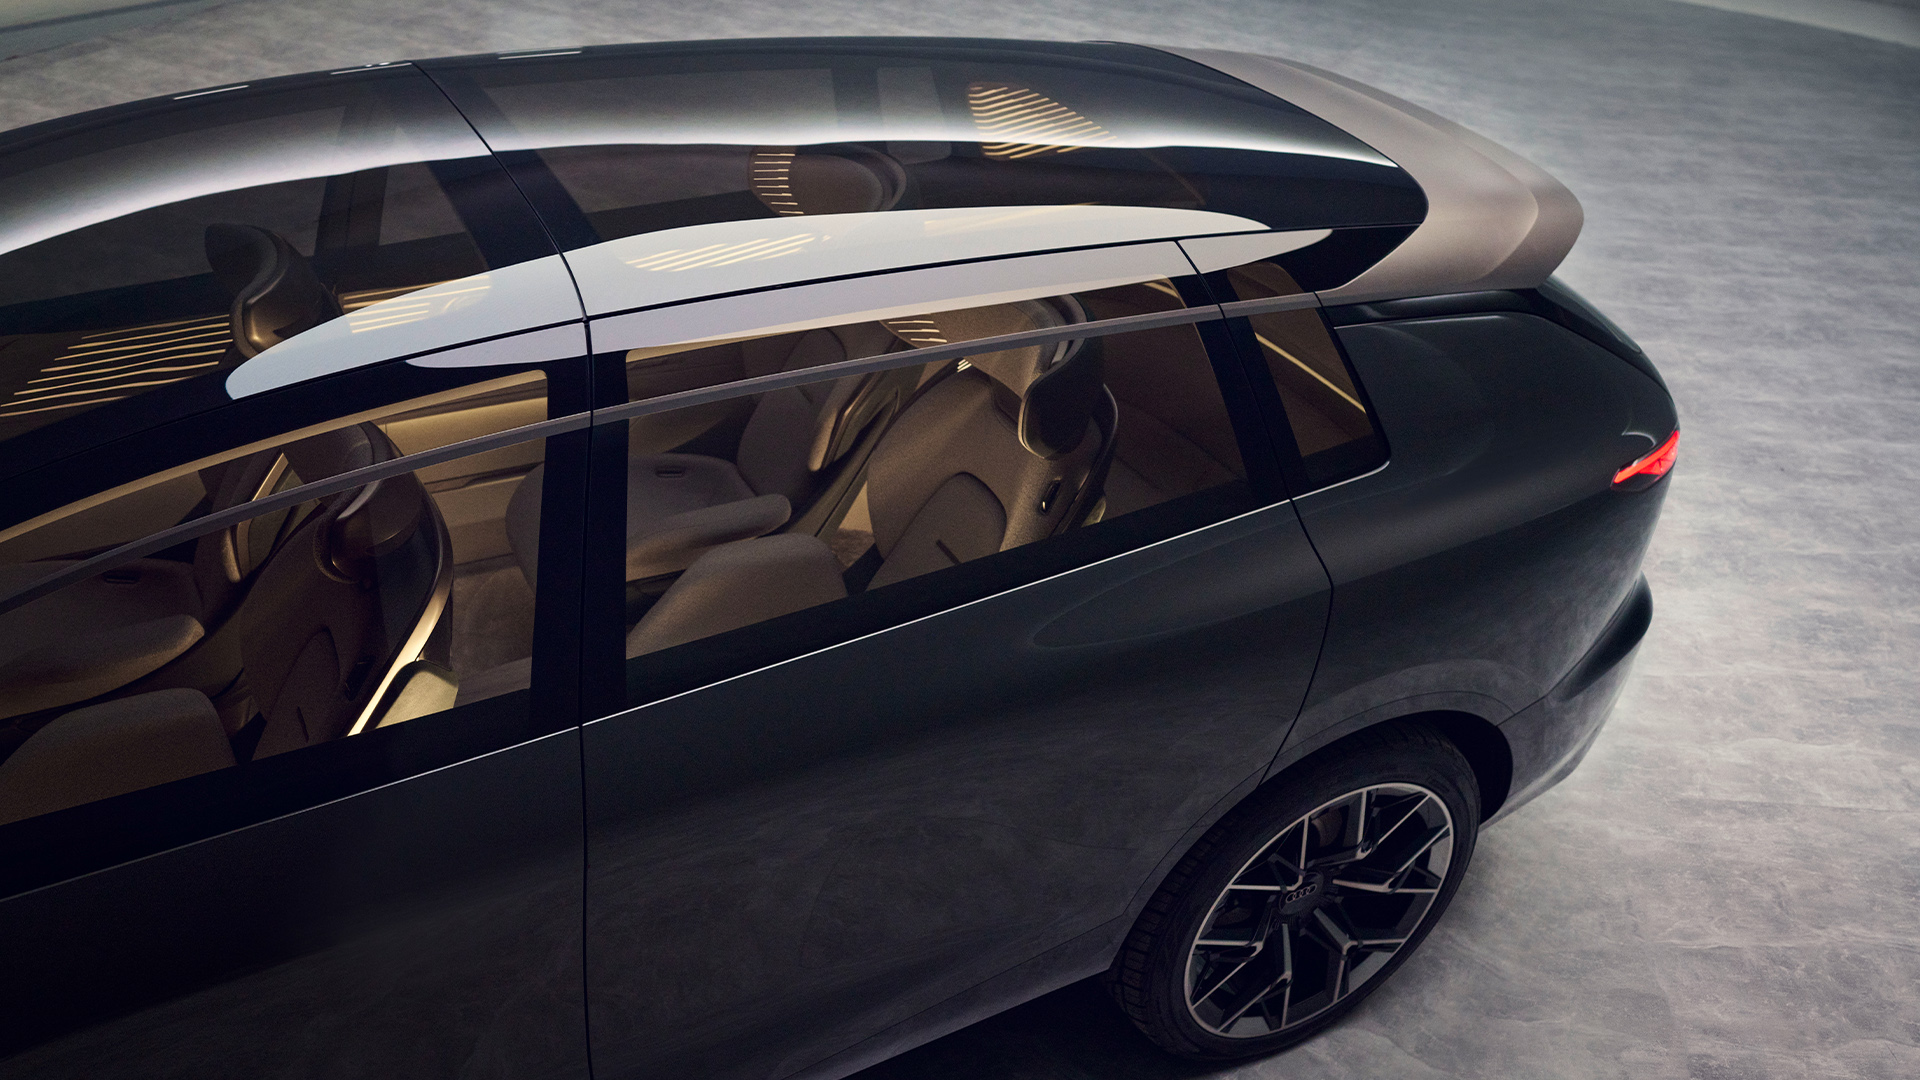 View through the glass roof into the interior of the Audi urbansphere concept.